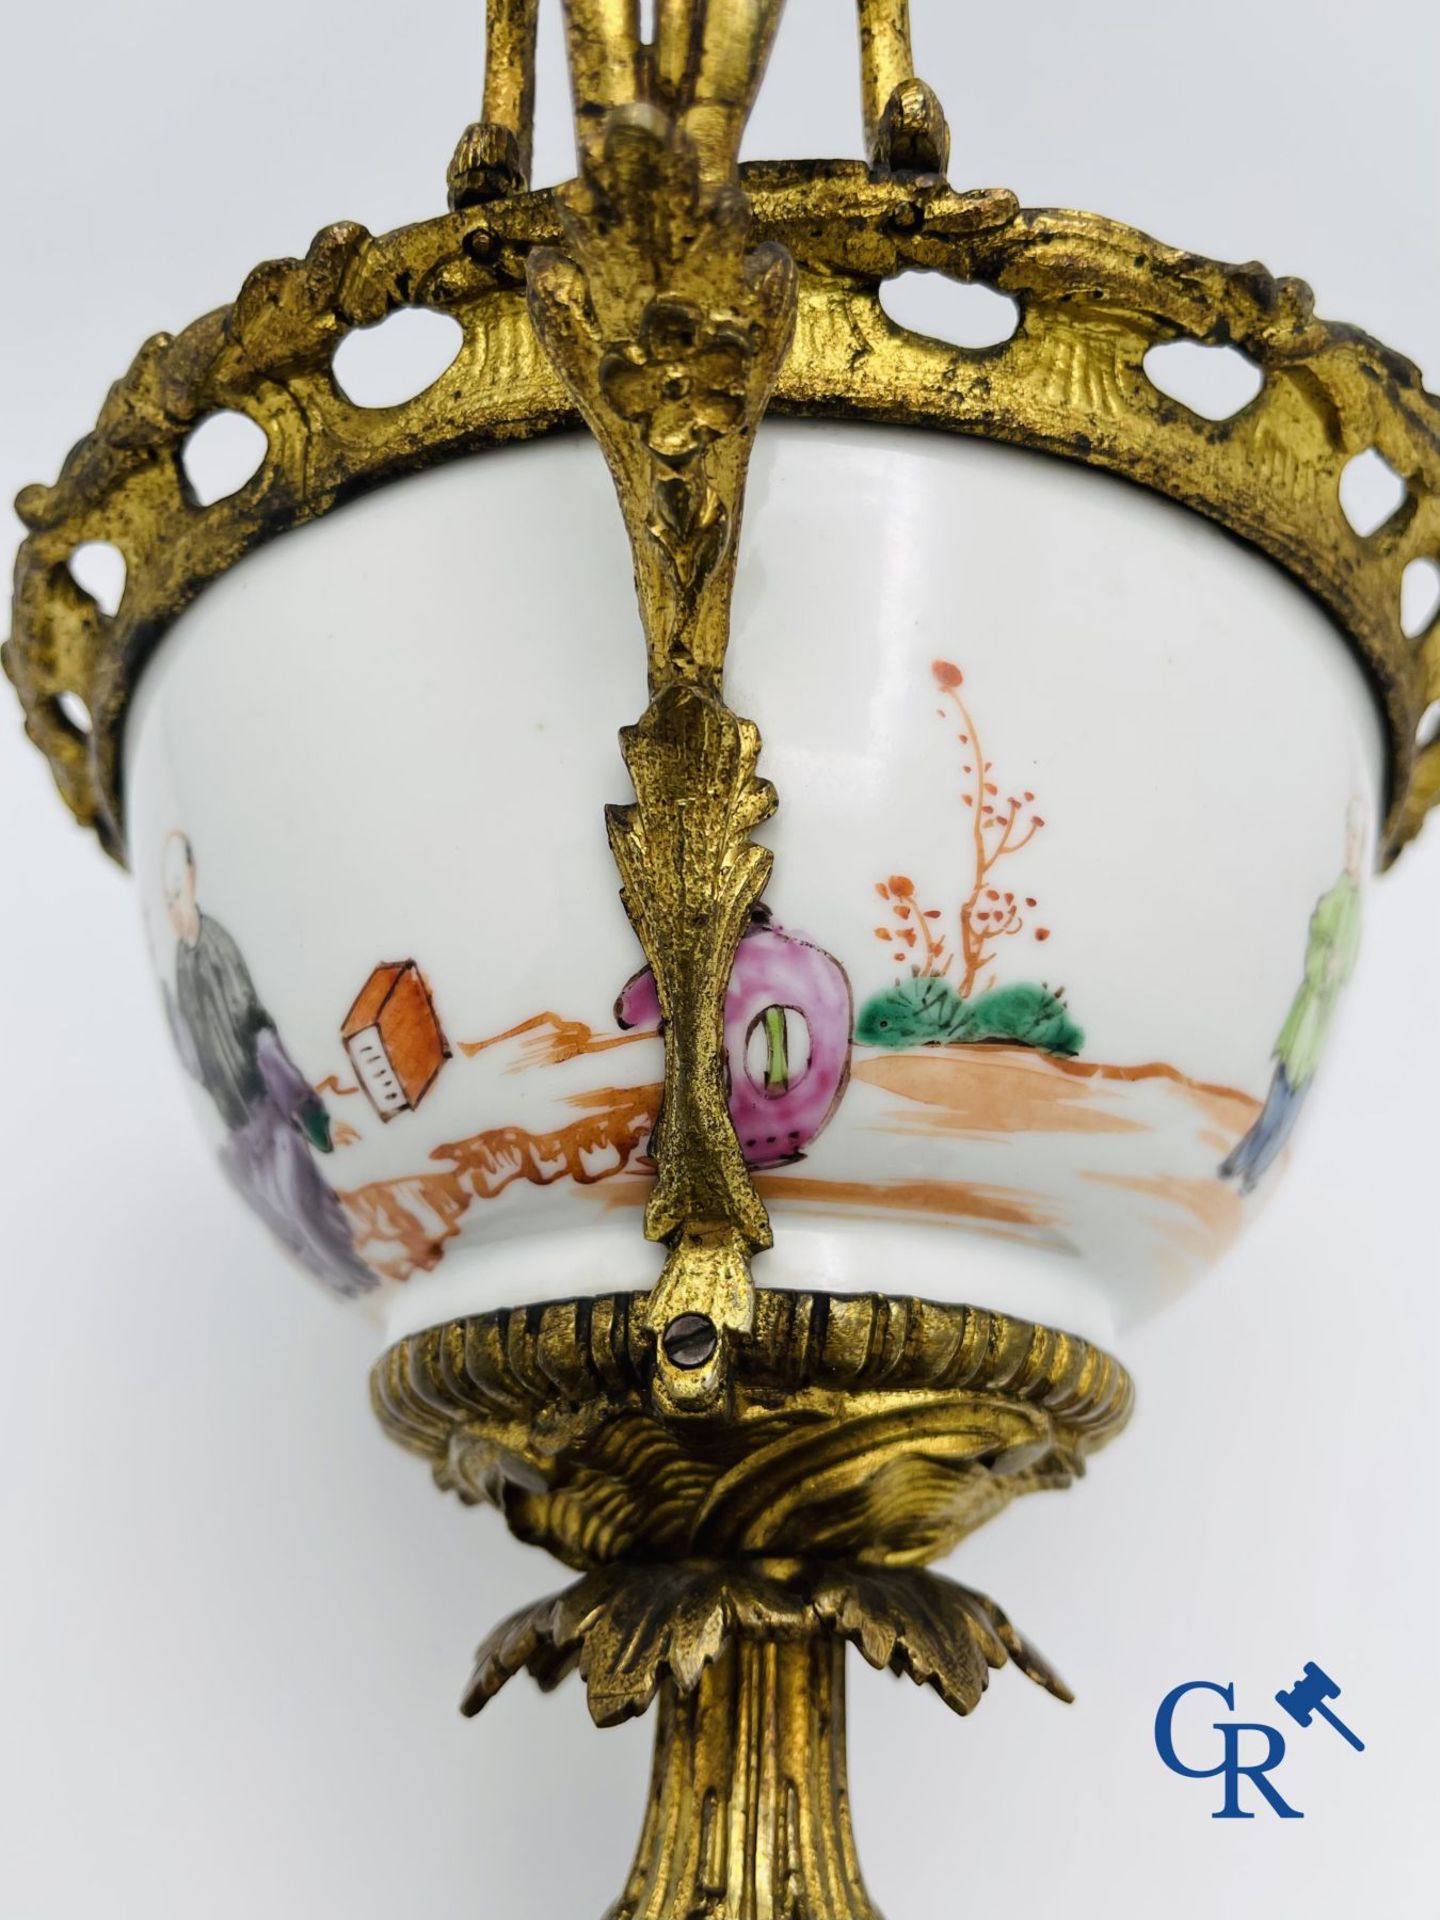 Chinese porcelain: An 18th century gilt-bronze mounted bowl in Chinese export porcelain. - Image 8 of 13